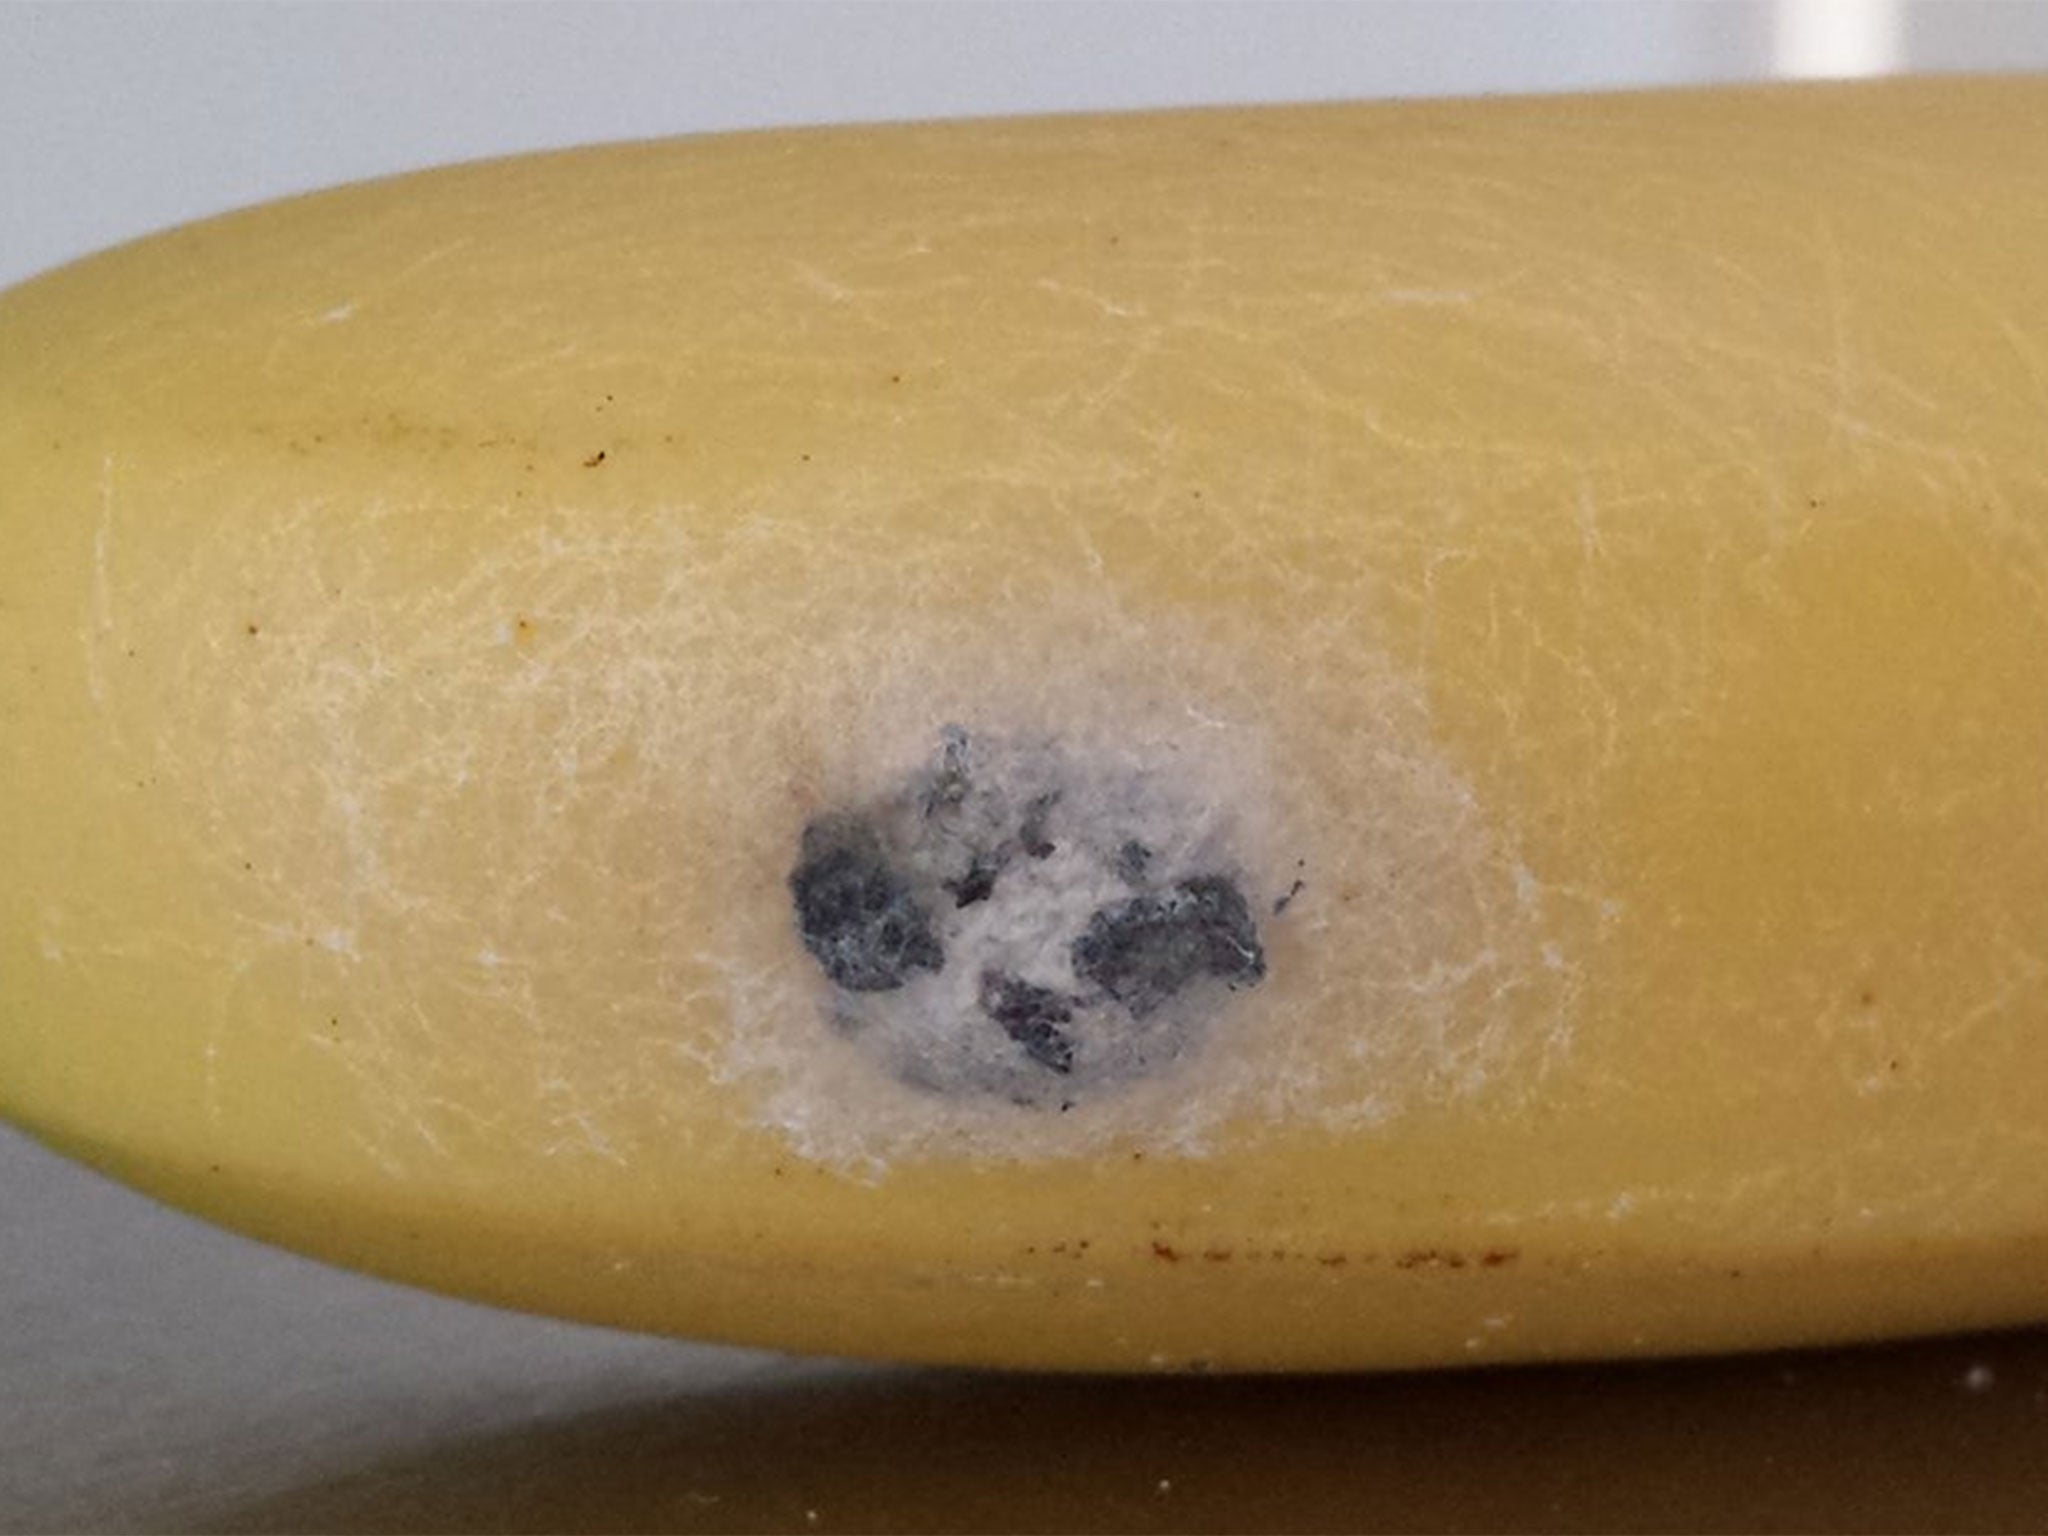 Maria Layton said Tesco were 'useless' when she called to say she found a 'massive spider cocoon' on a banana she was about to give to her six-year-old daughter